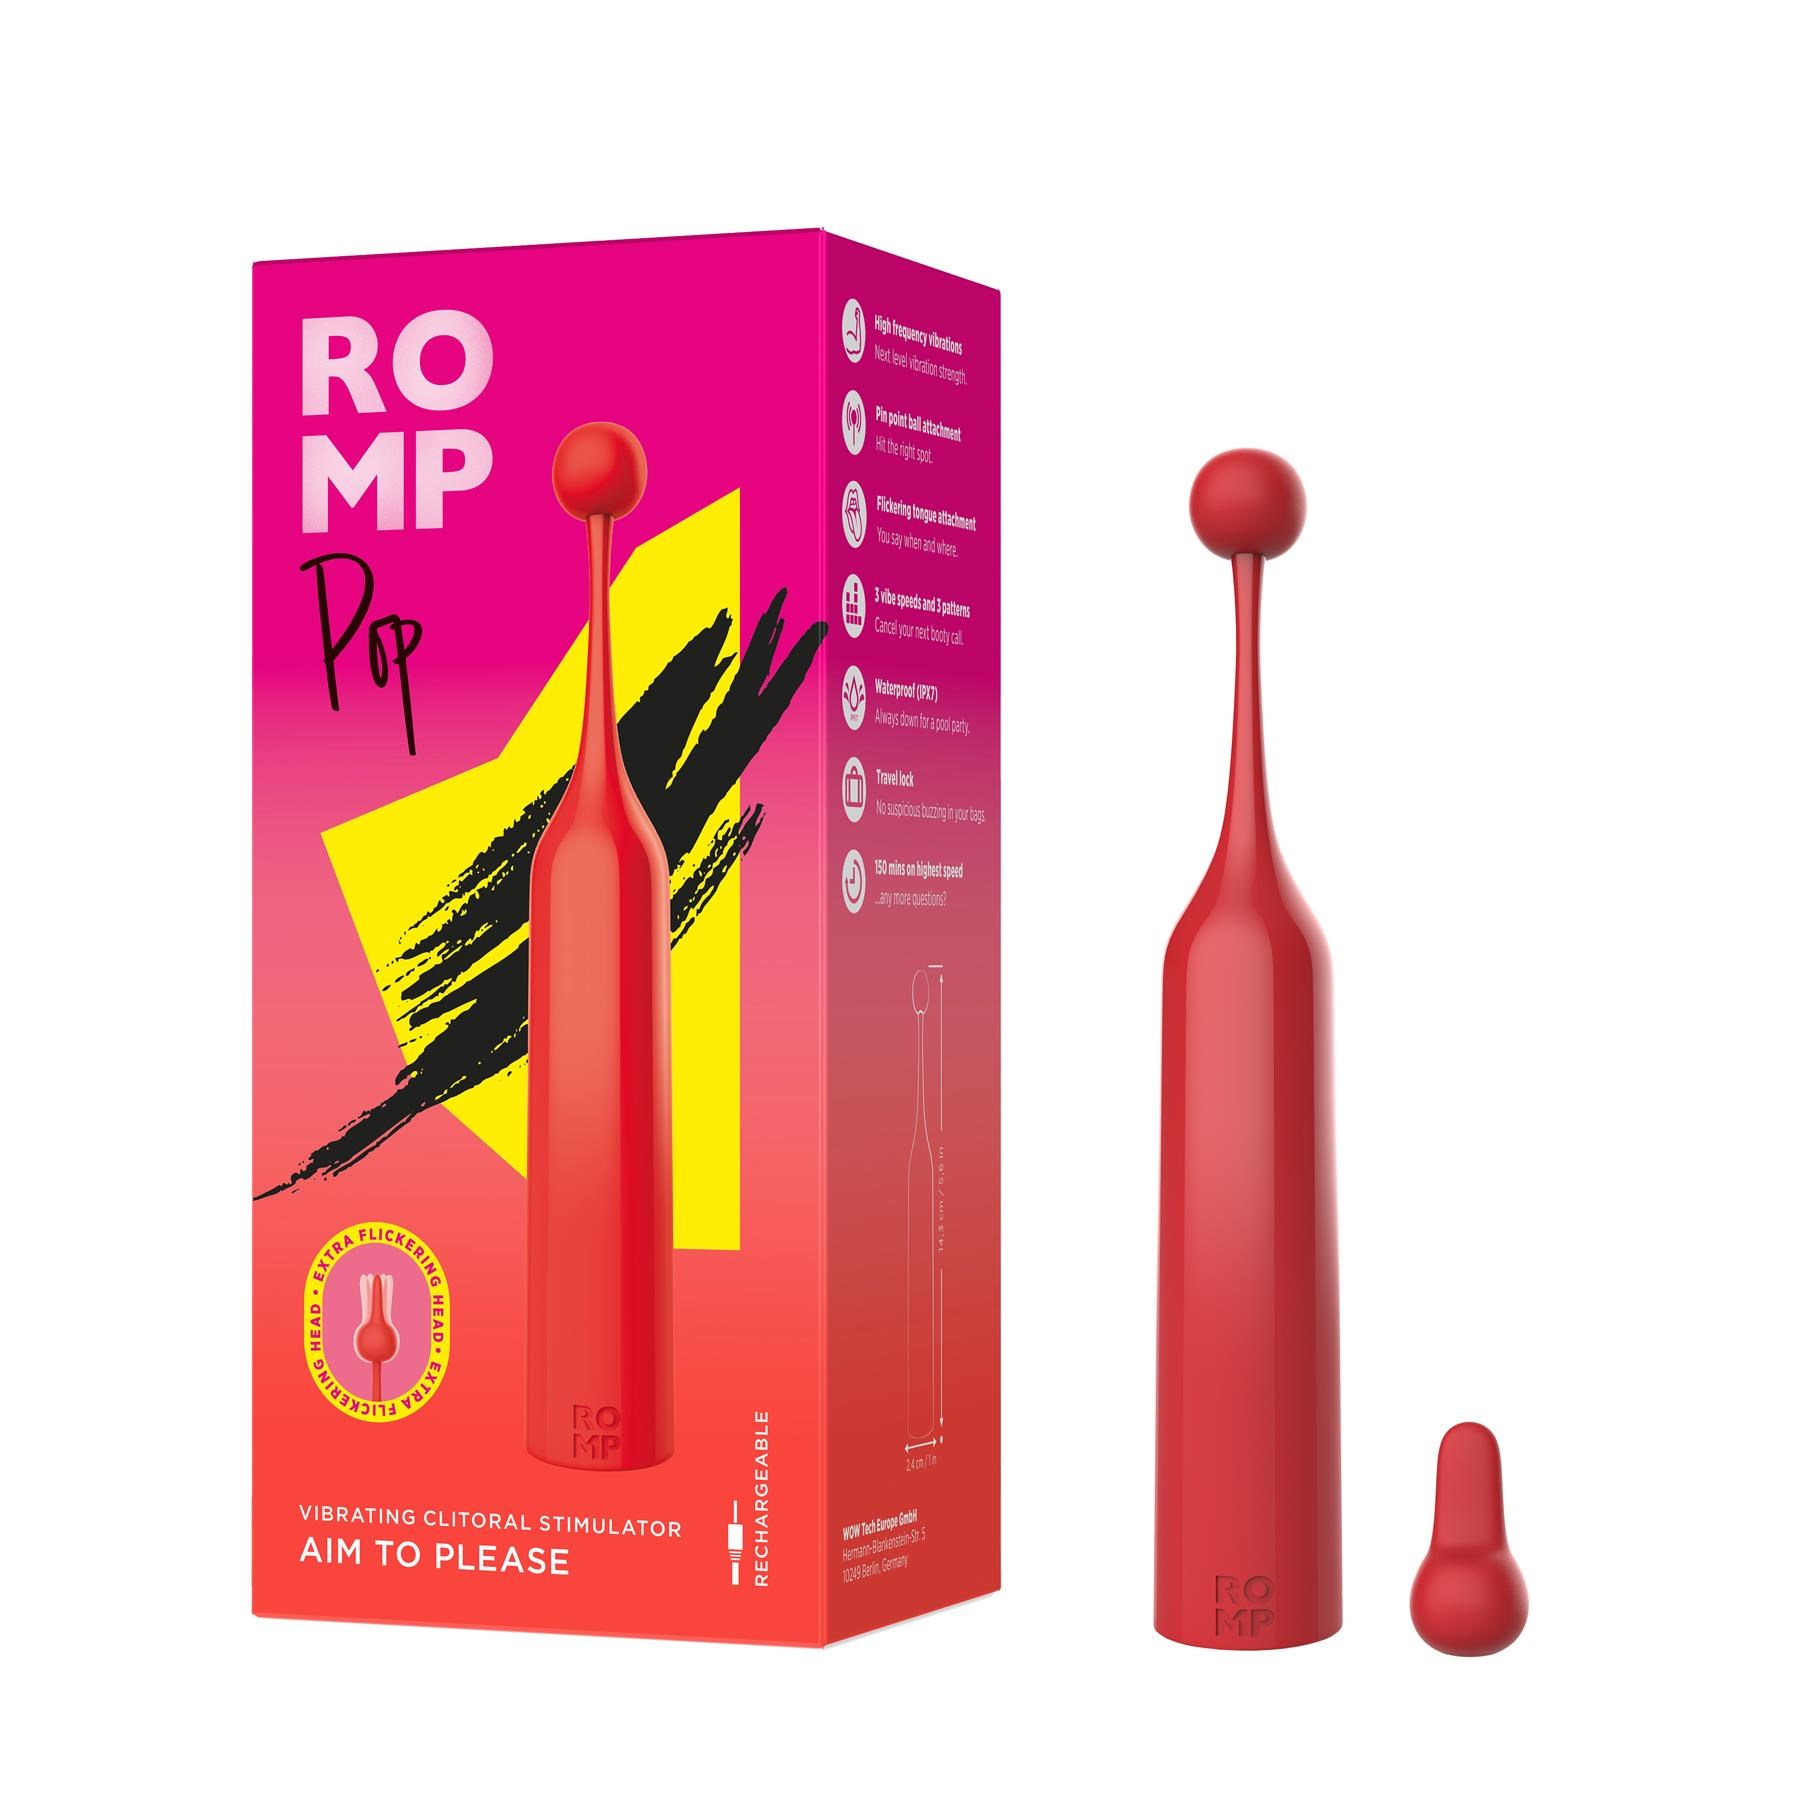 Romp Pop Clitoral Vibrator- Product and Packaging